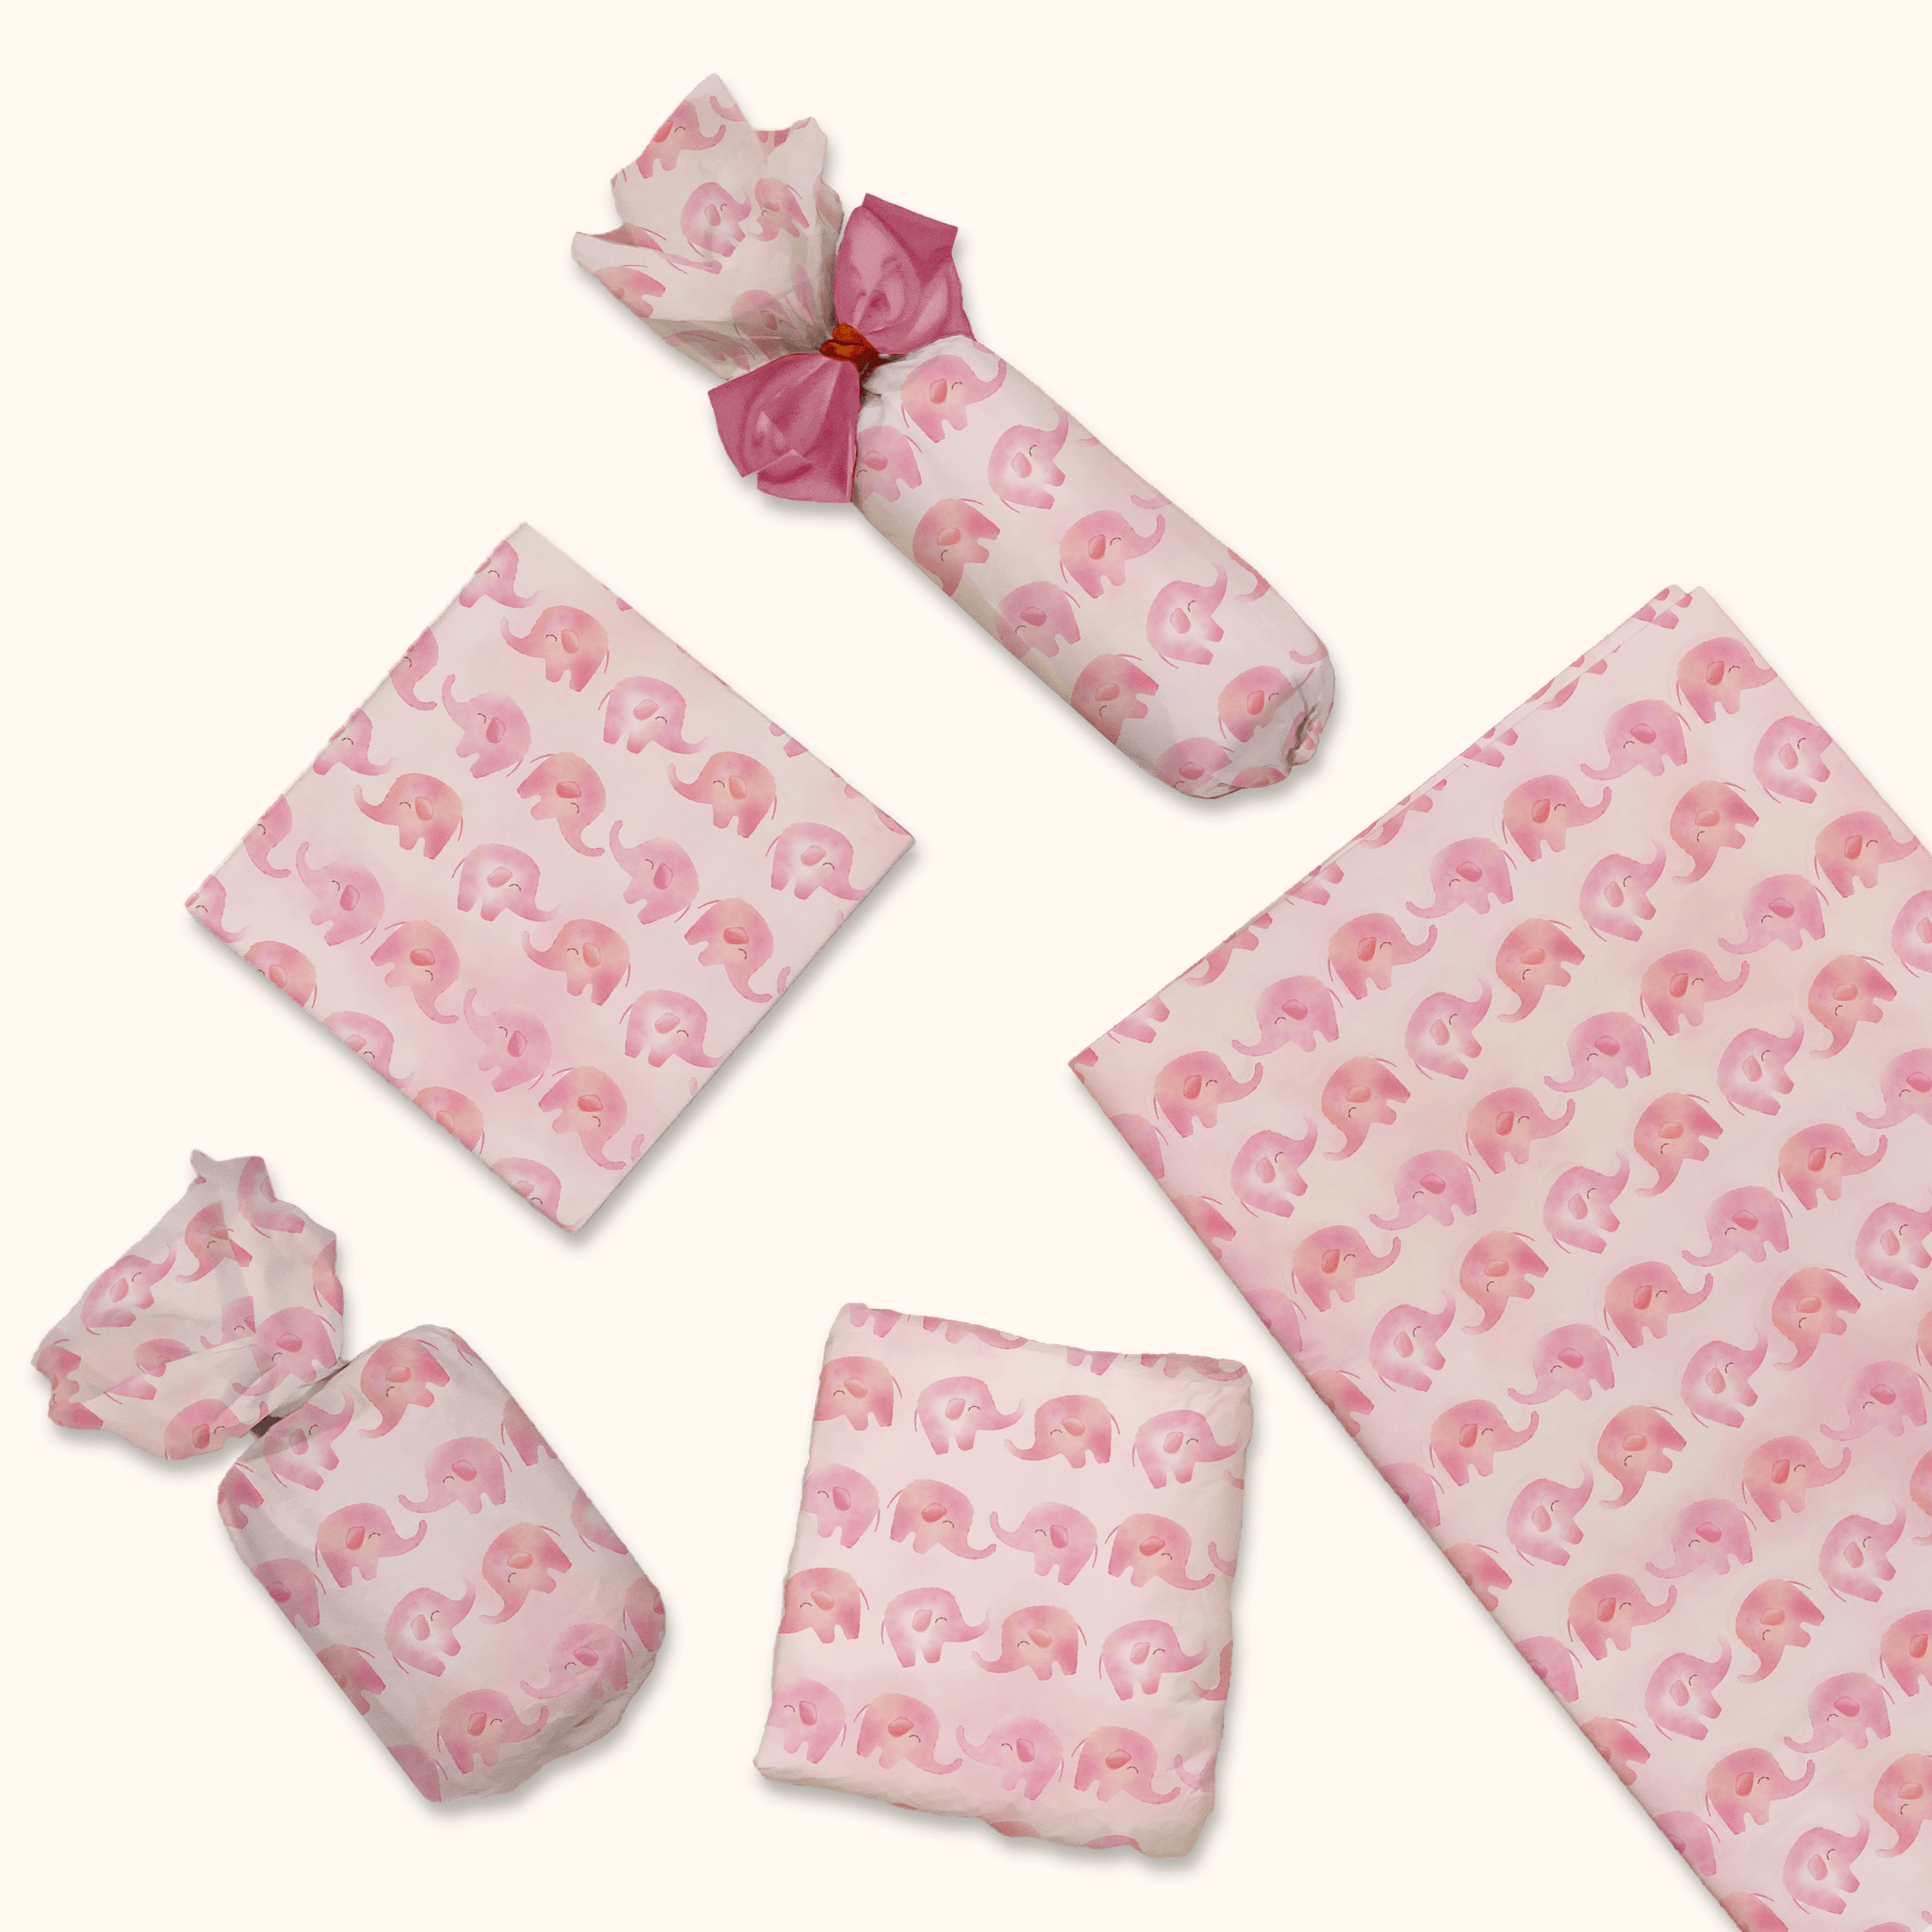 Pink Elephant Tissue Paper 12 Sheets